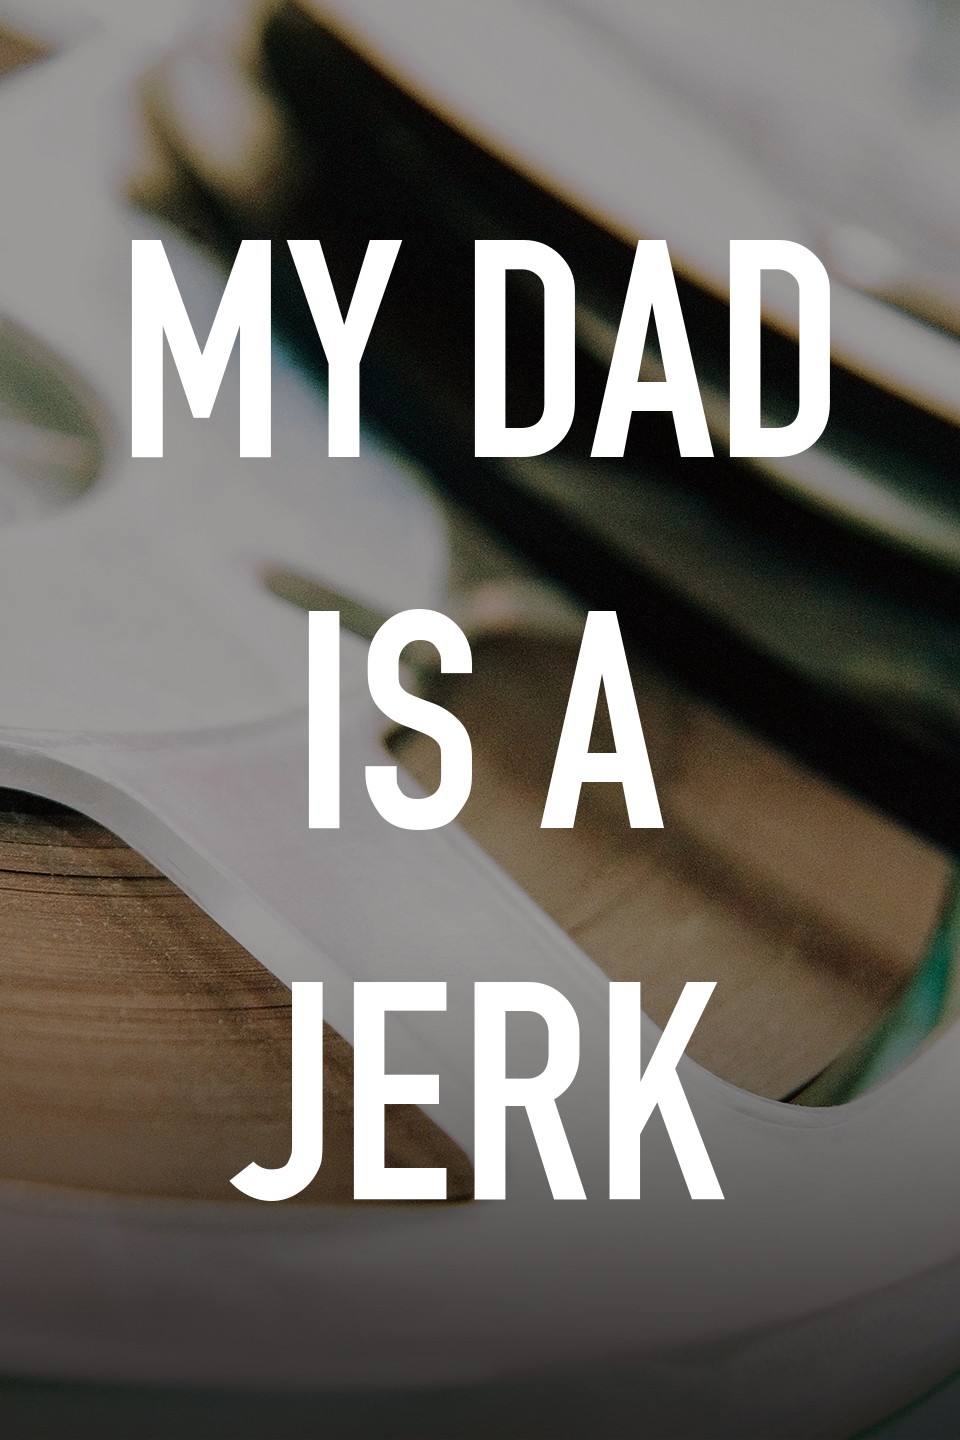 cynthia mascarenhas recommends My Dad Is A Jerk